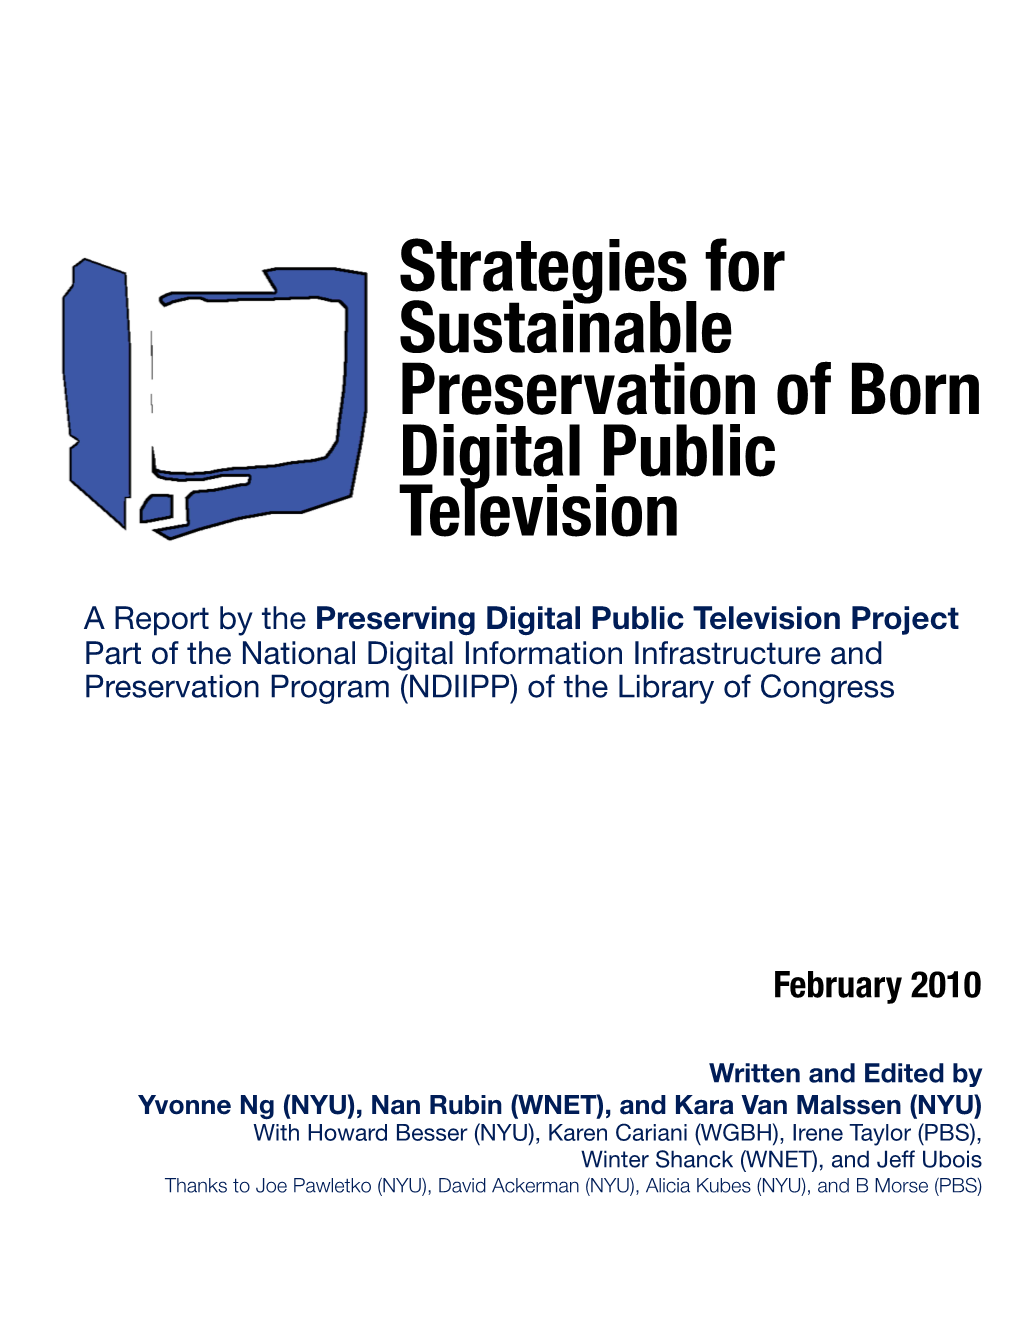 Strategies for Sustainable Preservation of Born Digital Public Television